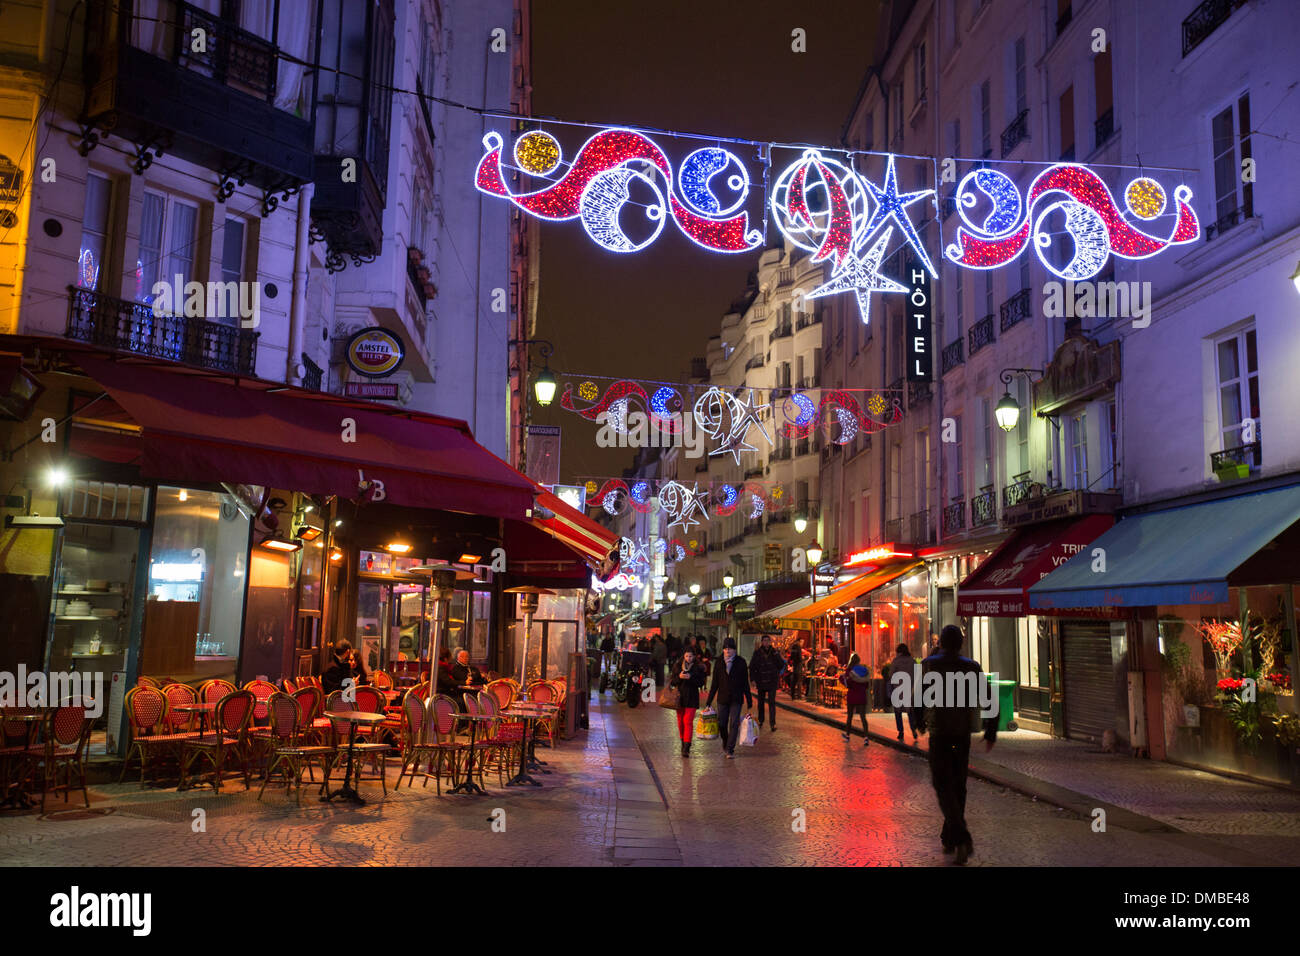 Christmas lights at night on Rue Montorgueil in Paris, France Stock Photo